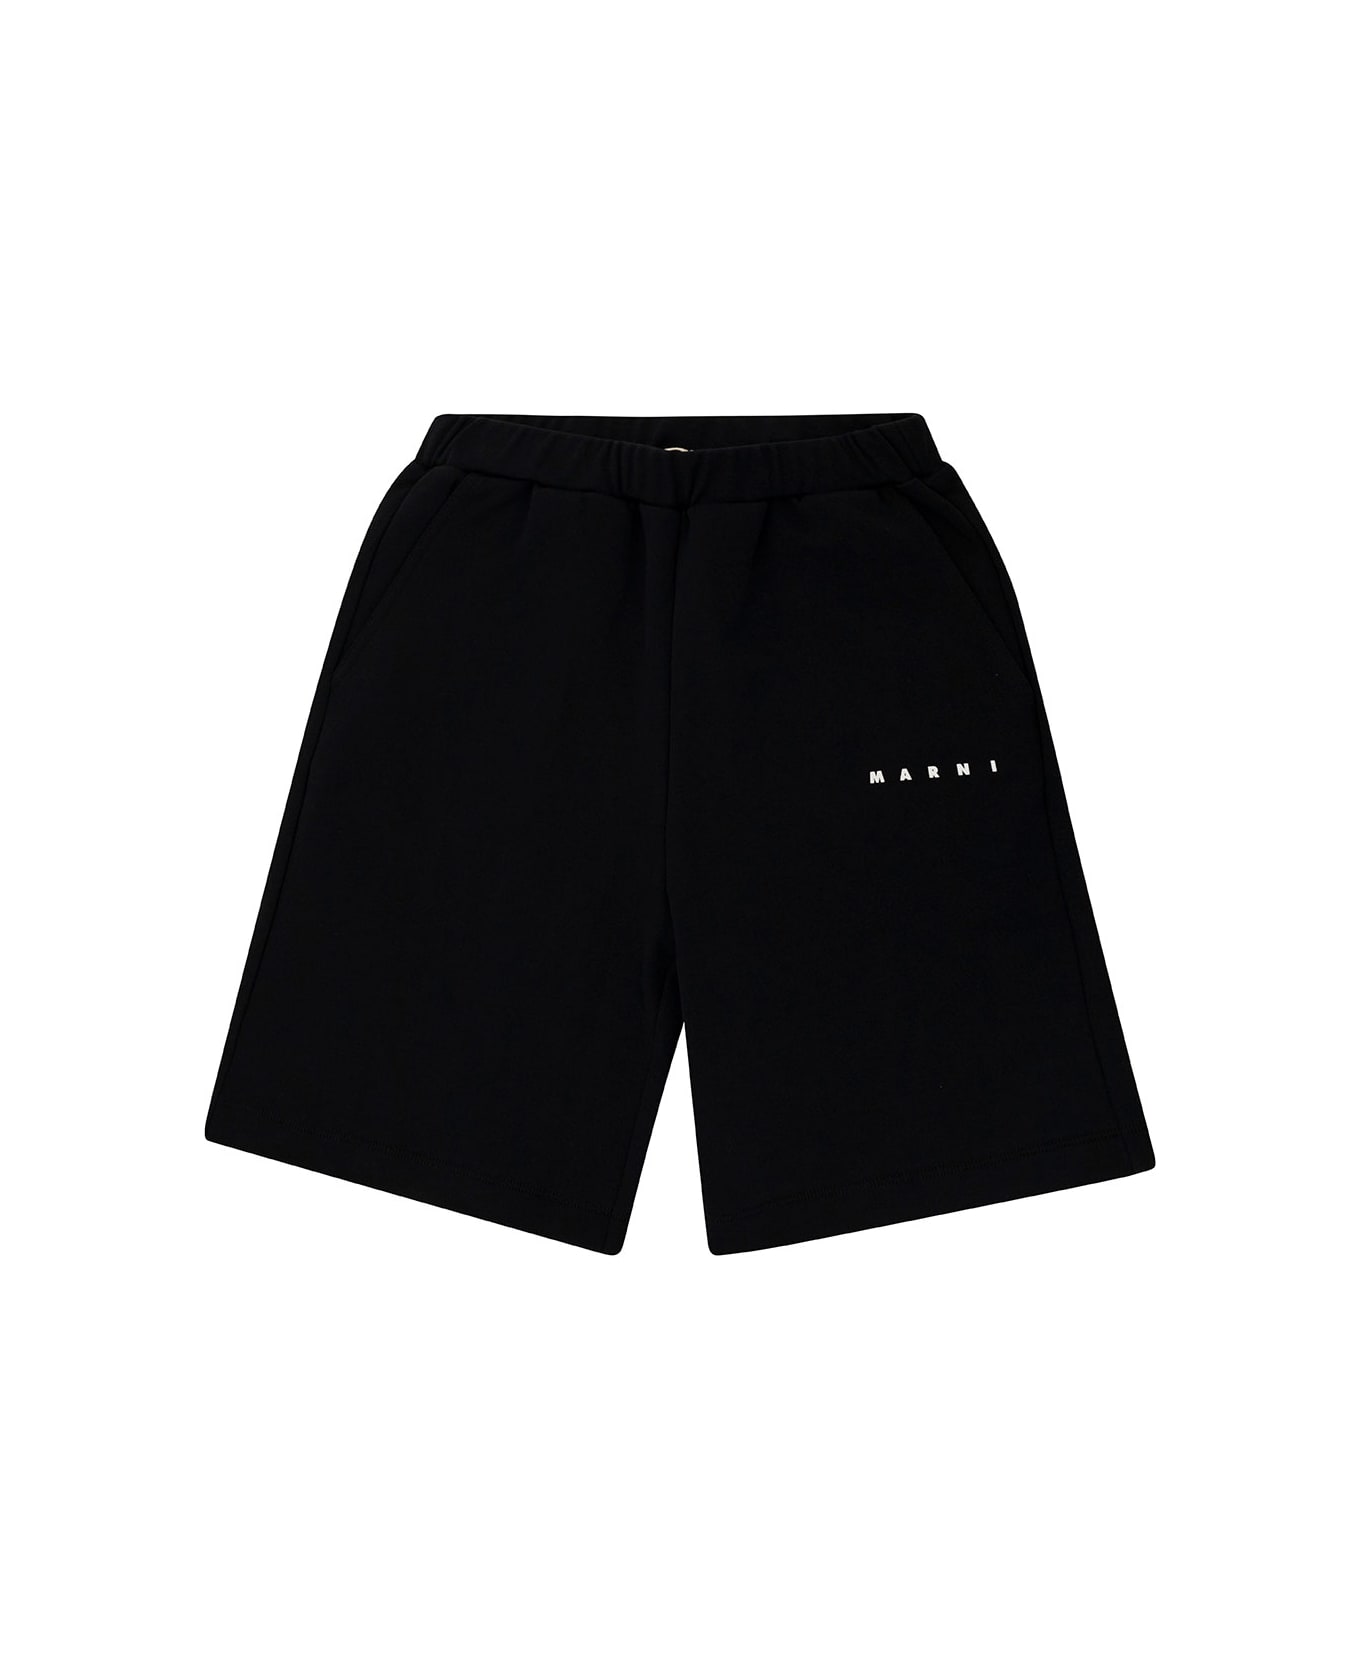 Marni Black Shorts With Contrasting Logo Print In Cotton Boy - Black ボトムス